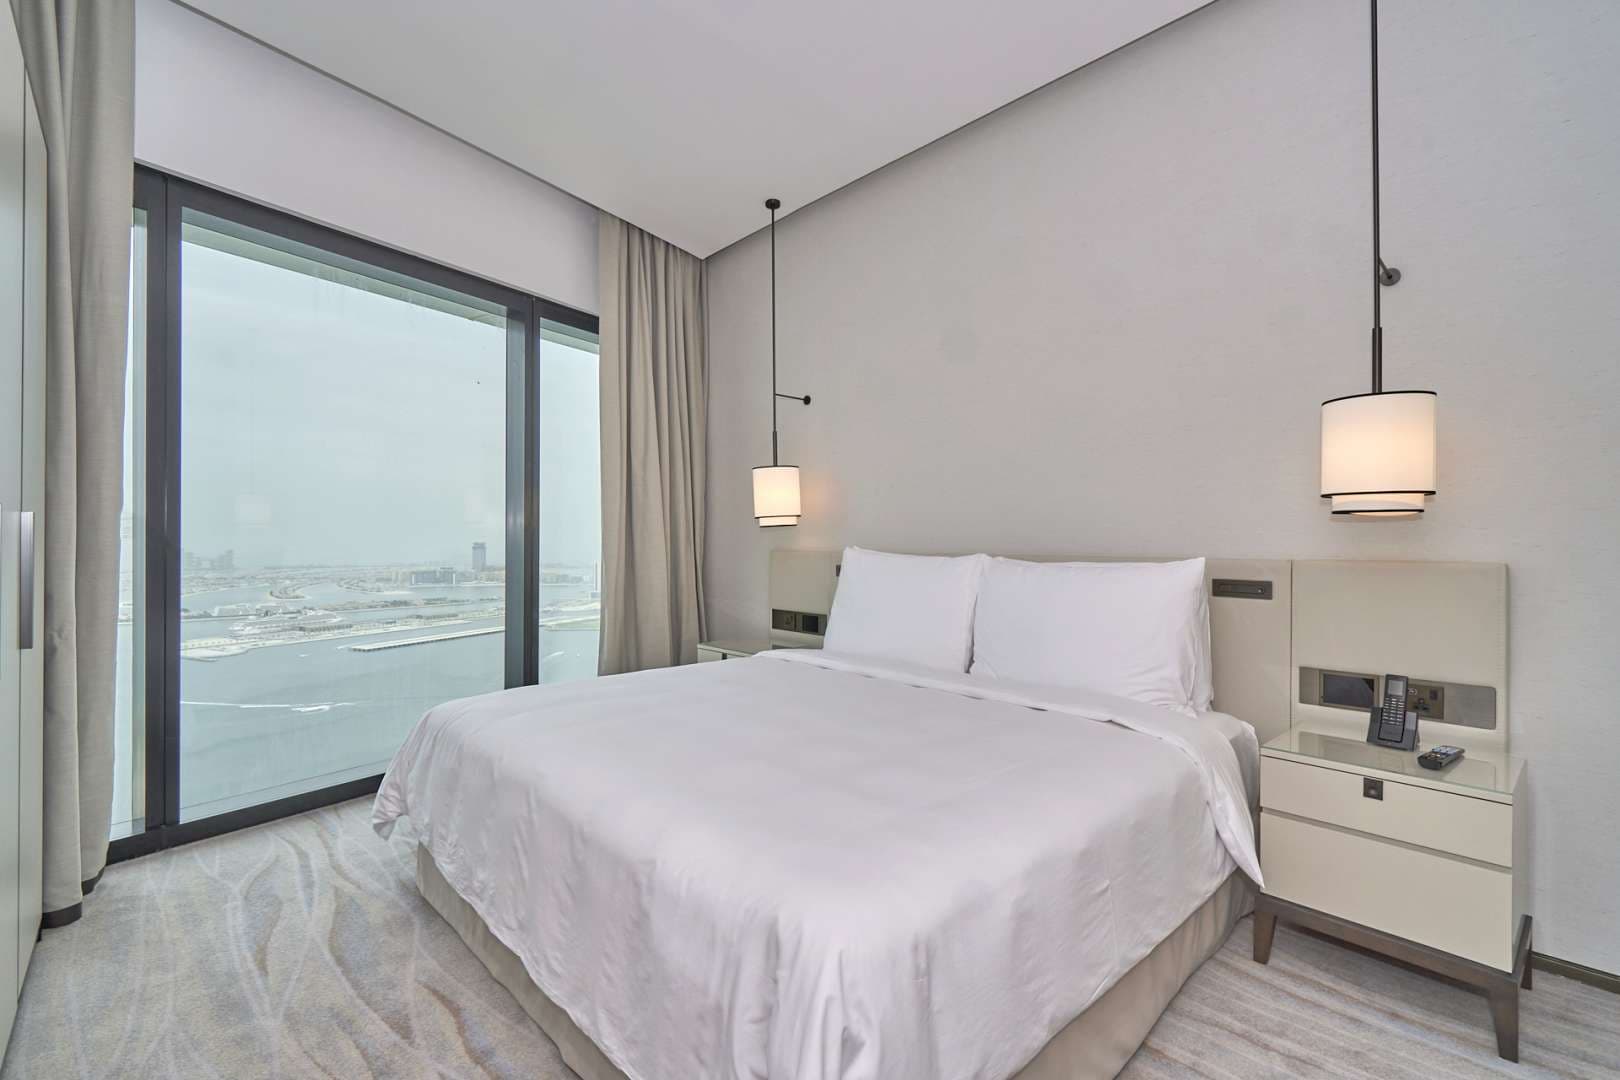 2 Bedroom Apartment For Rent The Address Jumeirah Resort And Spa Lp08765 24ed3bb85df0b200.jpg